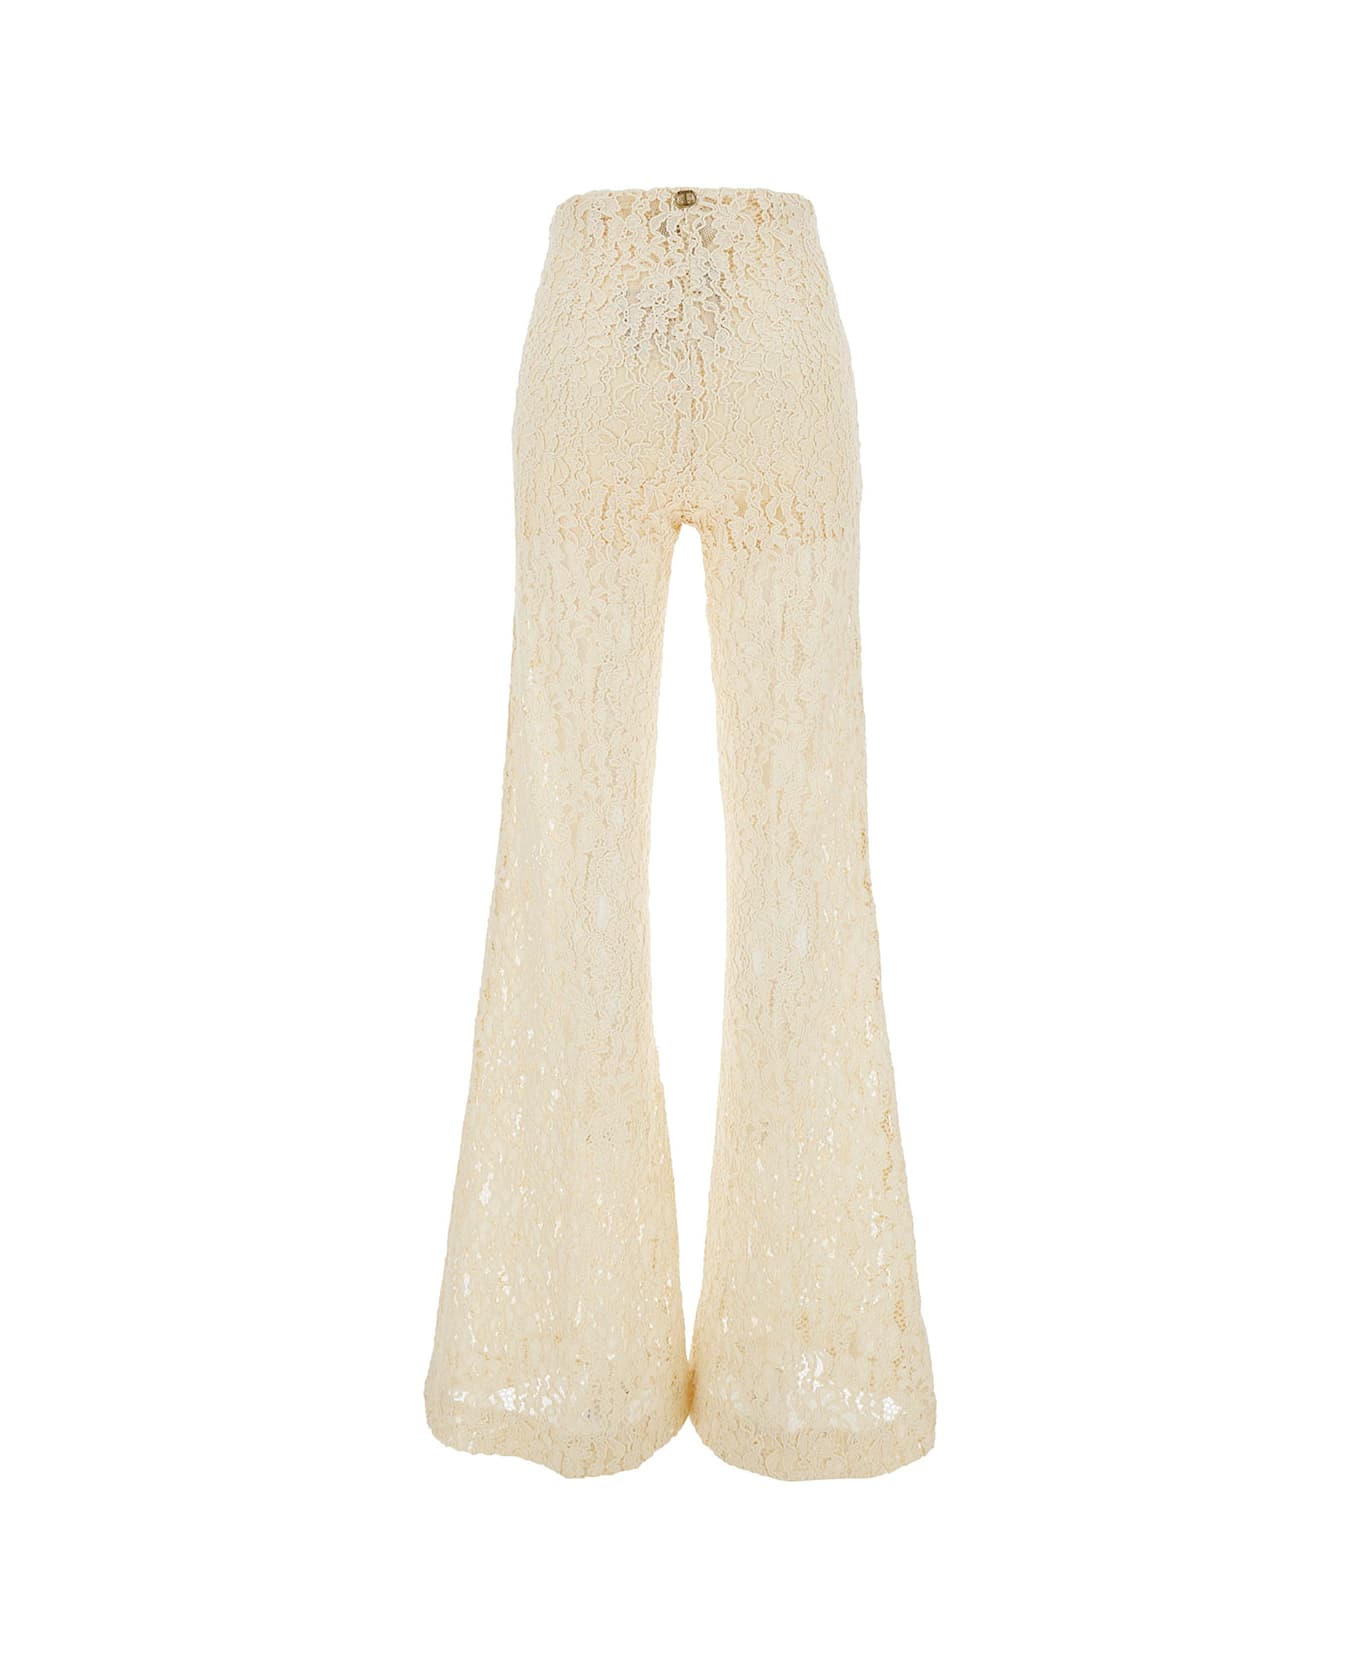 TwinSet Cream White High-waisted Pants In Lace Woman - Beige